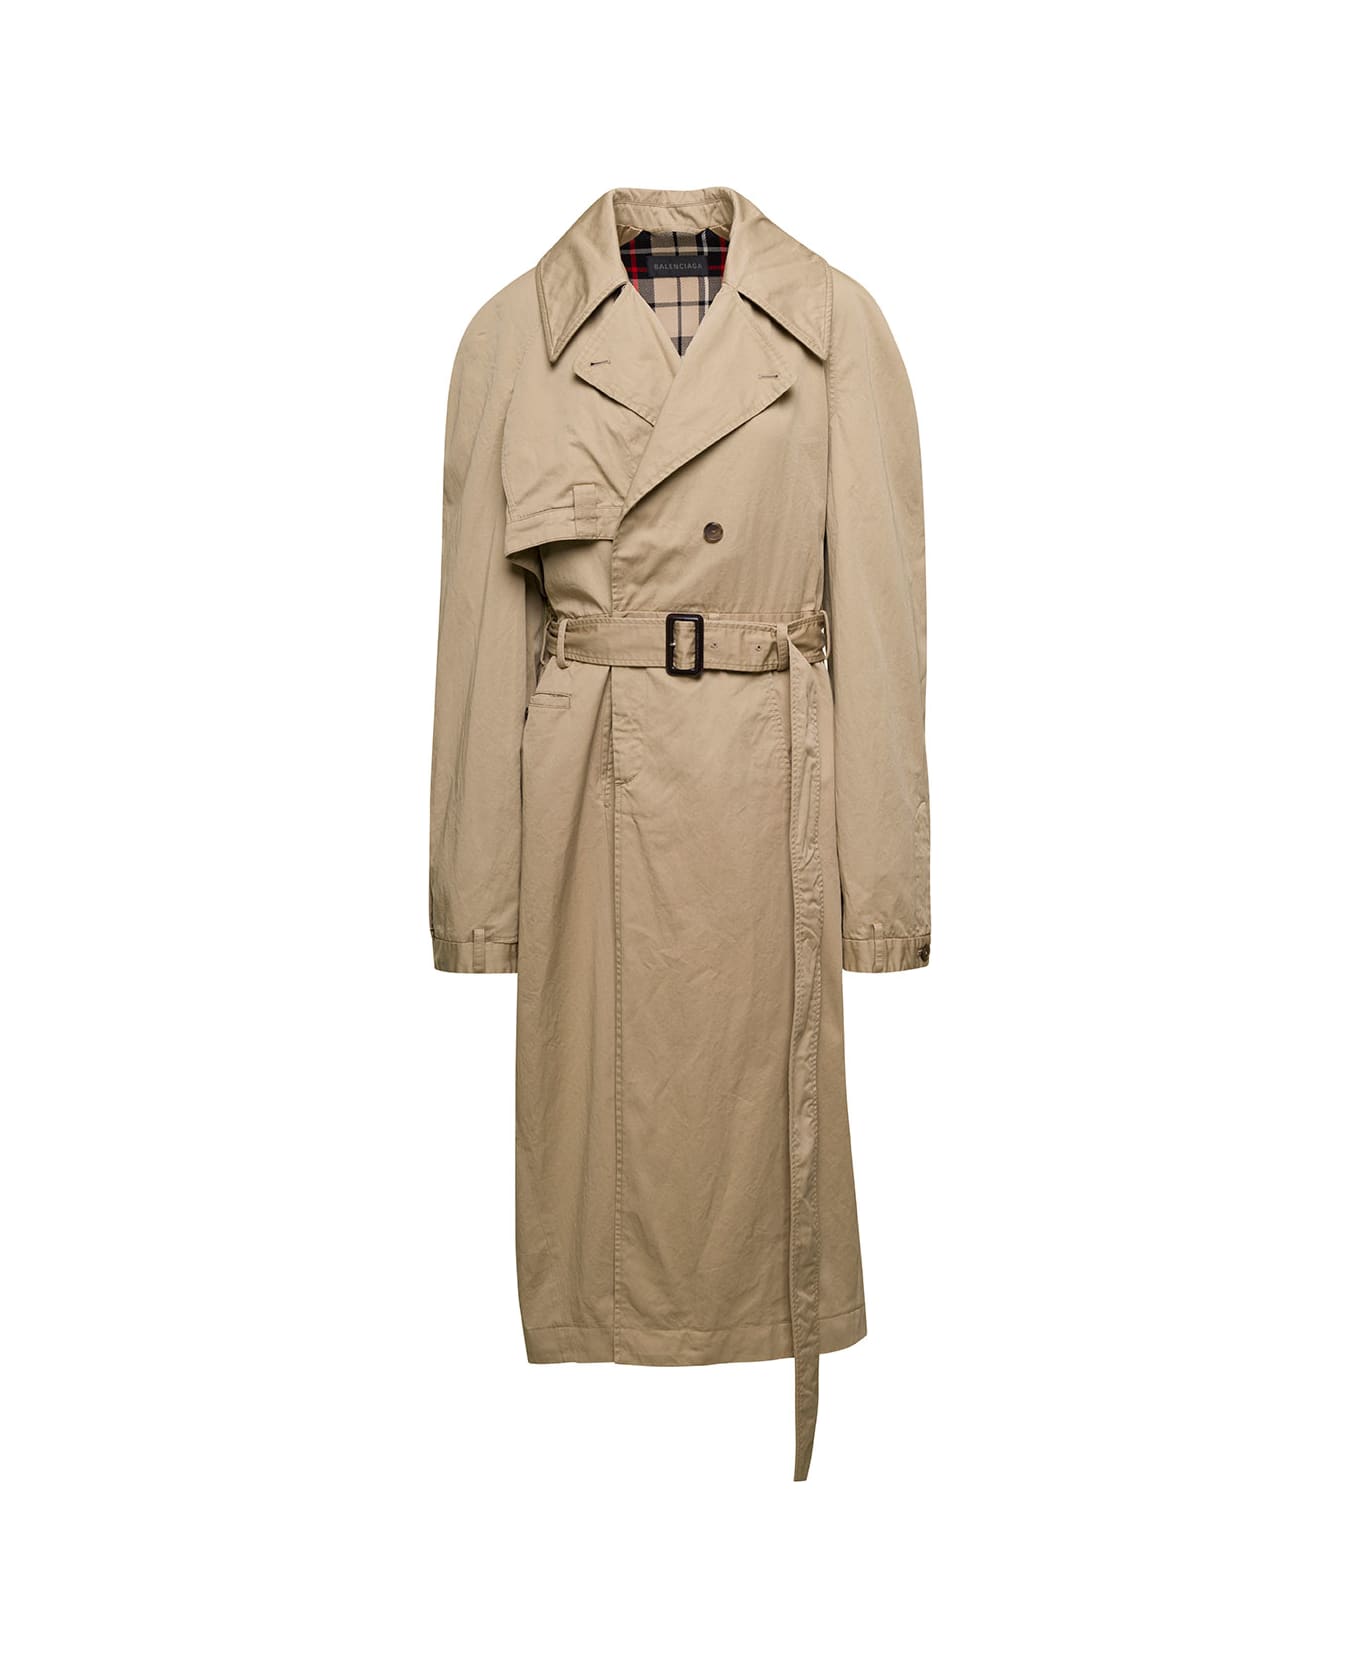 Balenciaga Beige Deconstructed Trench Coat With Matching Belt In Cotton Twill Woman - Beige